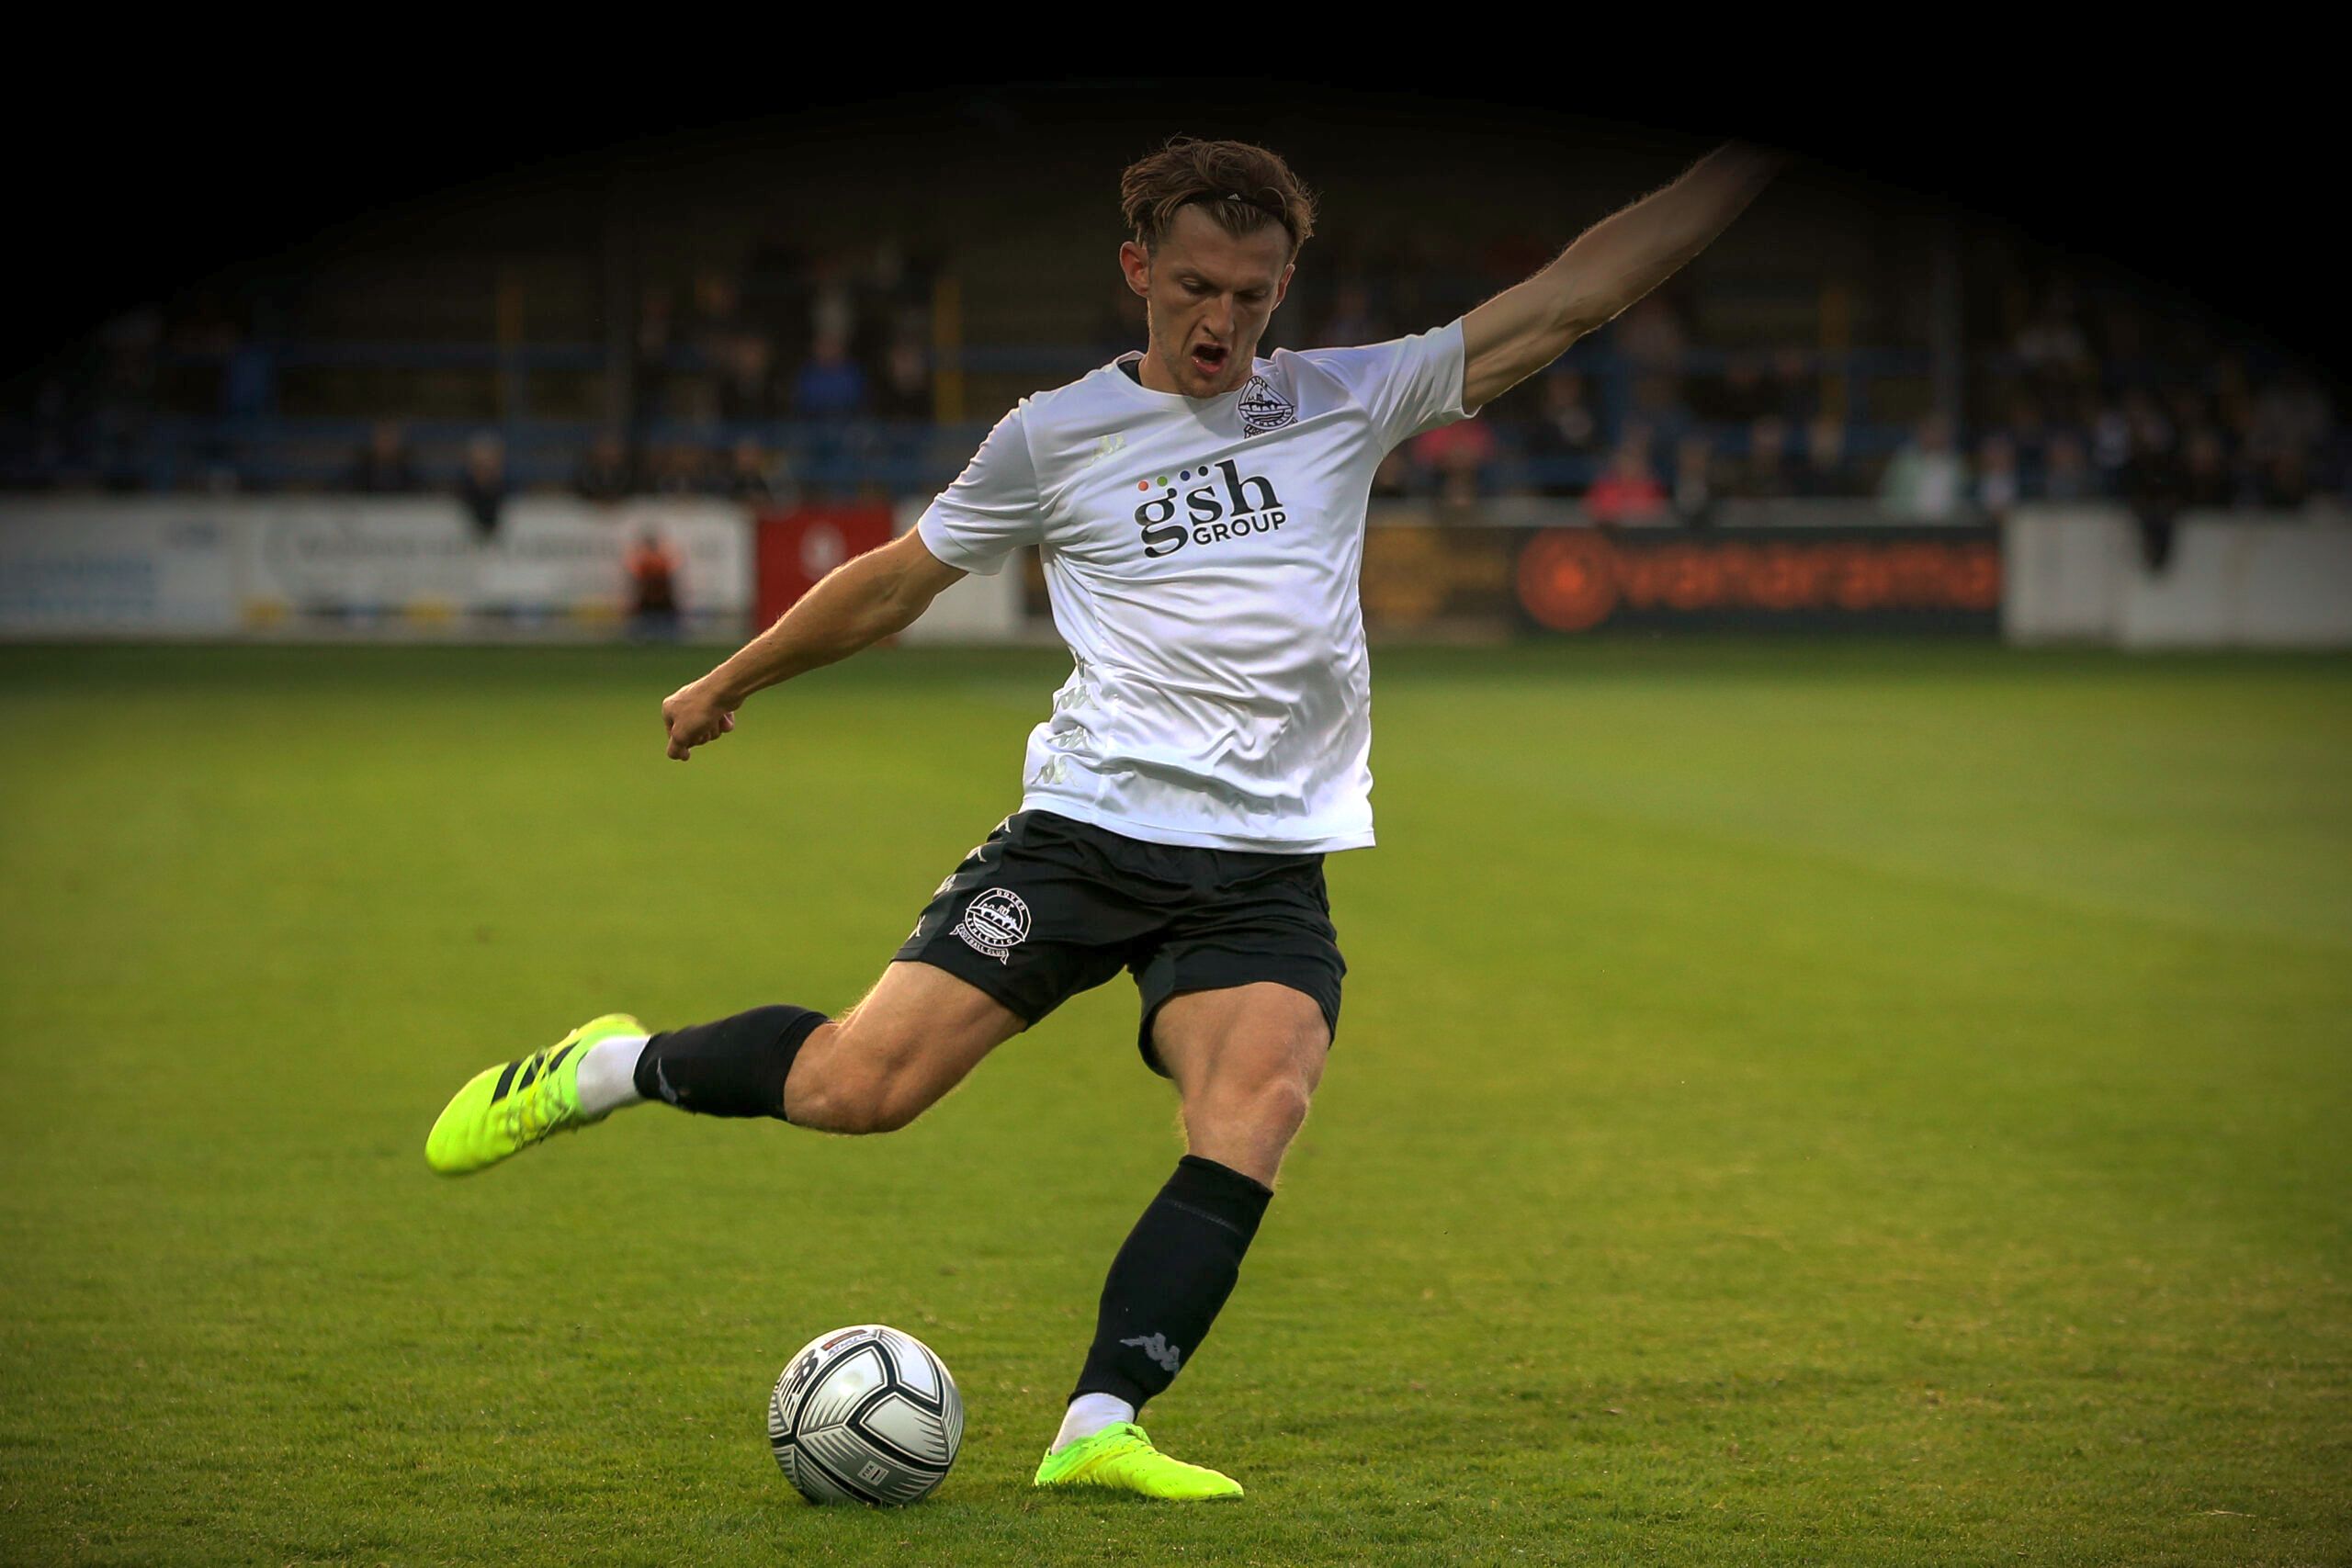 Collinge Remains in National League With Barnet